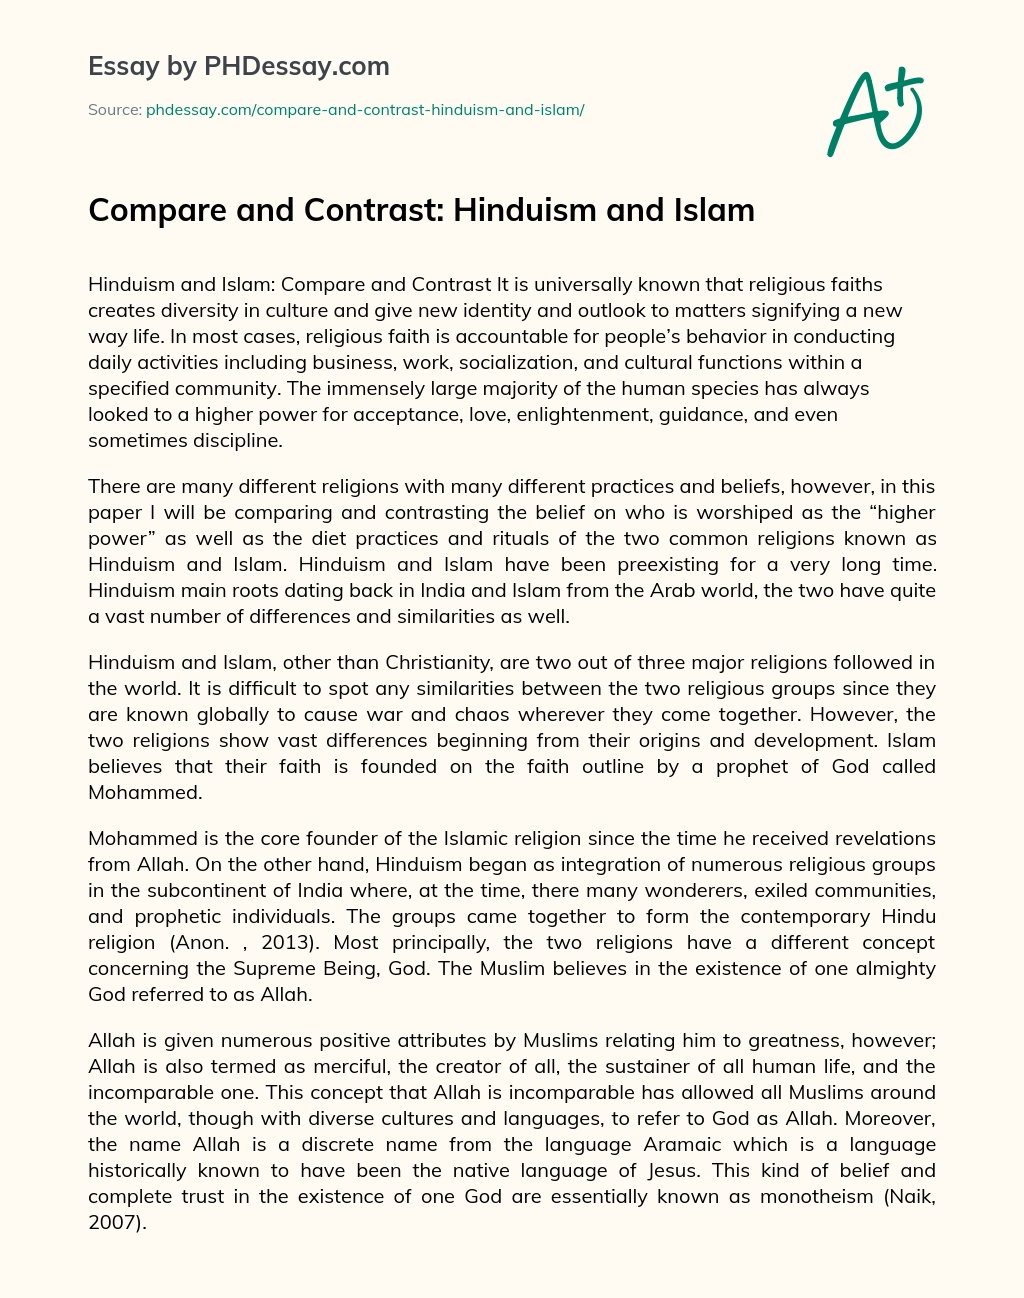 Compare and Contrast: Hinduism and Islam essay